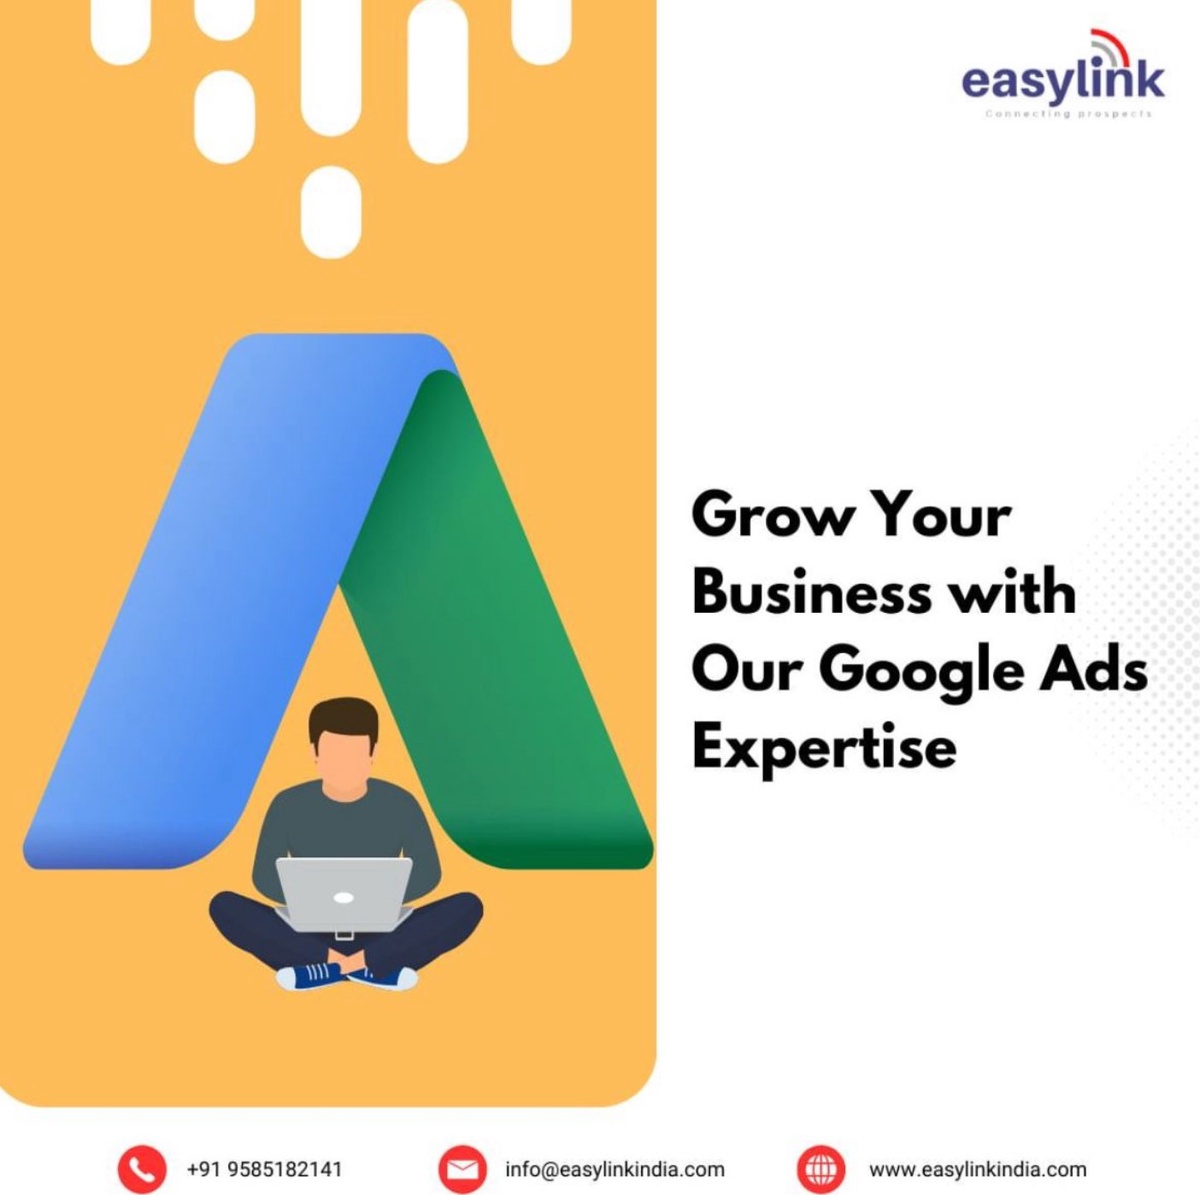 Mastering the Art of Clicks: Easylink India's Google Ads Precision